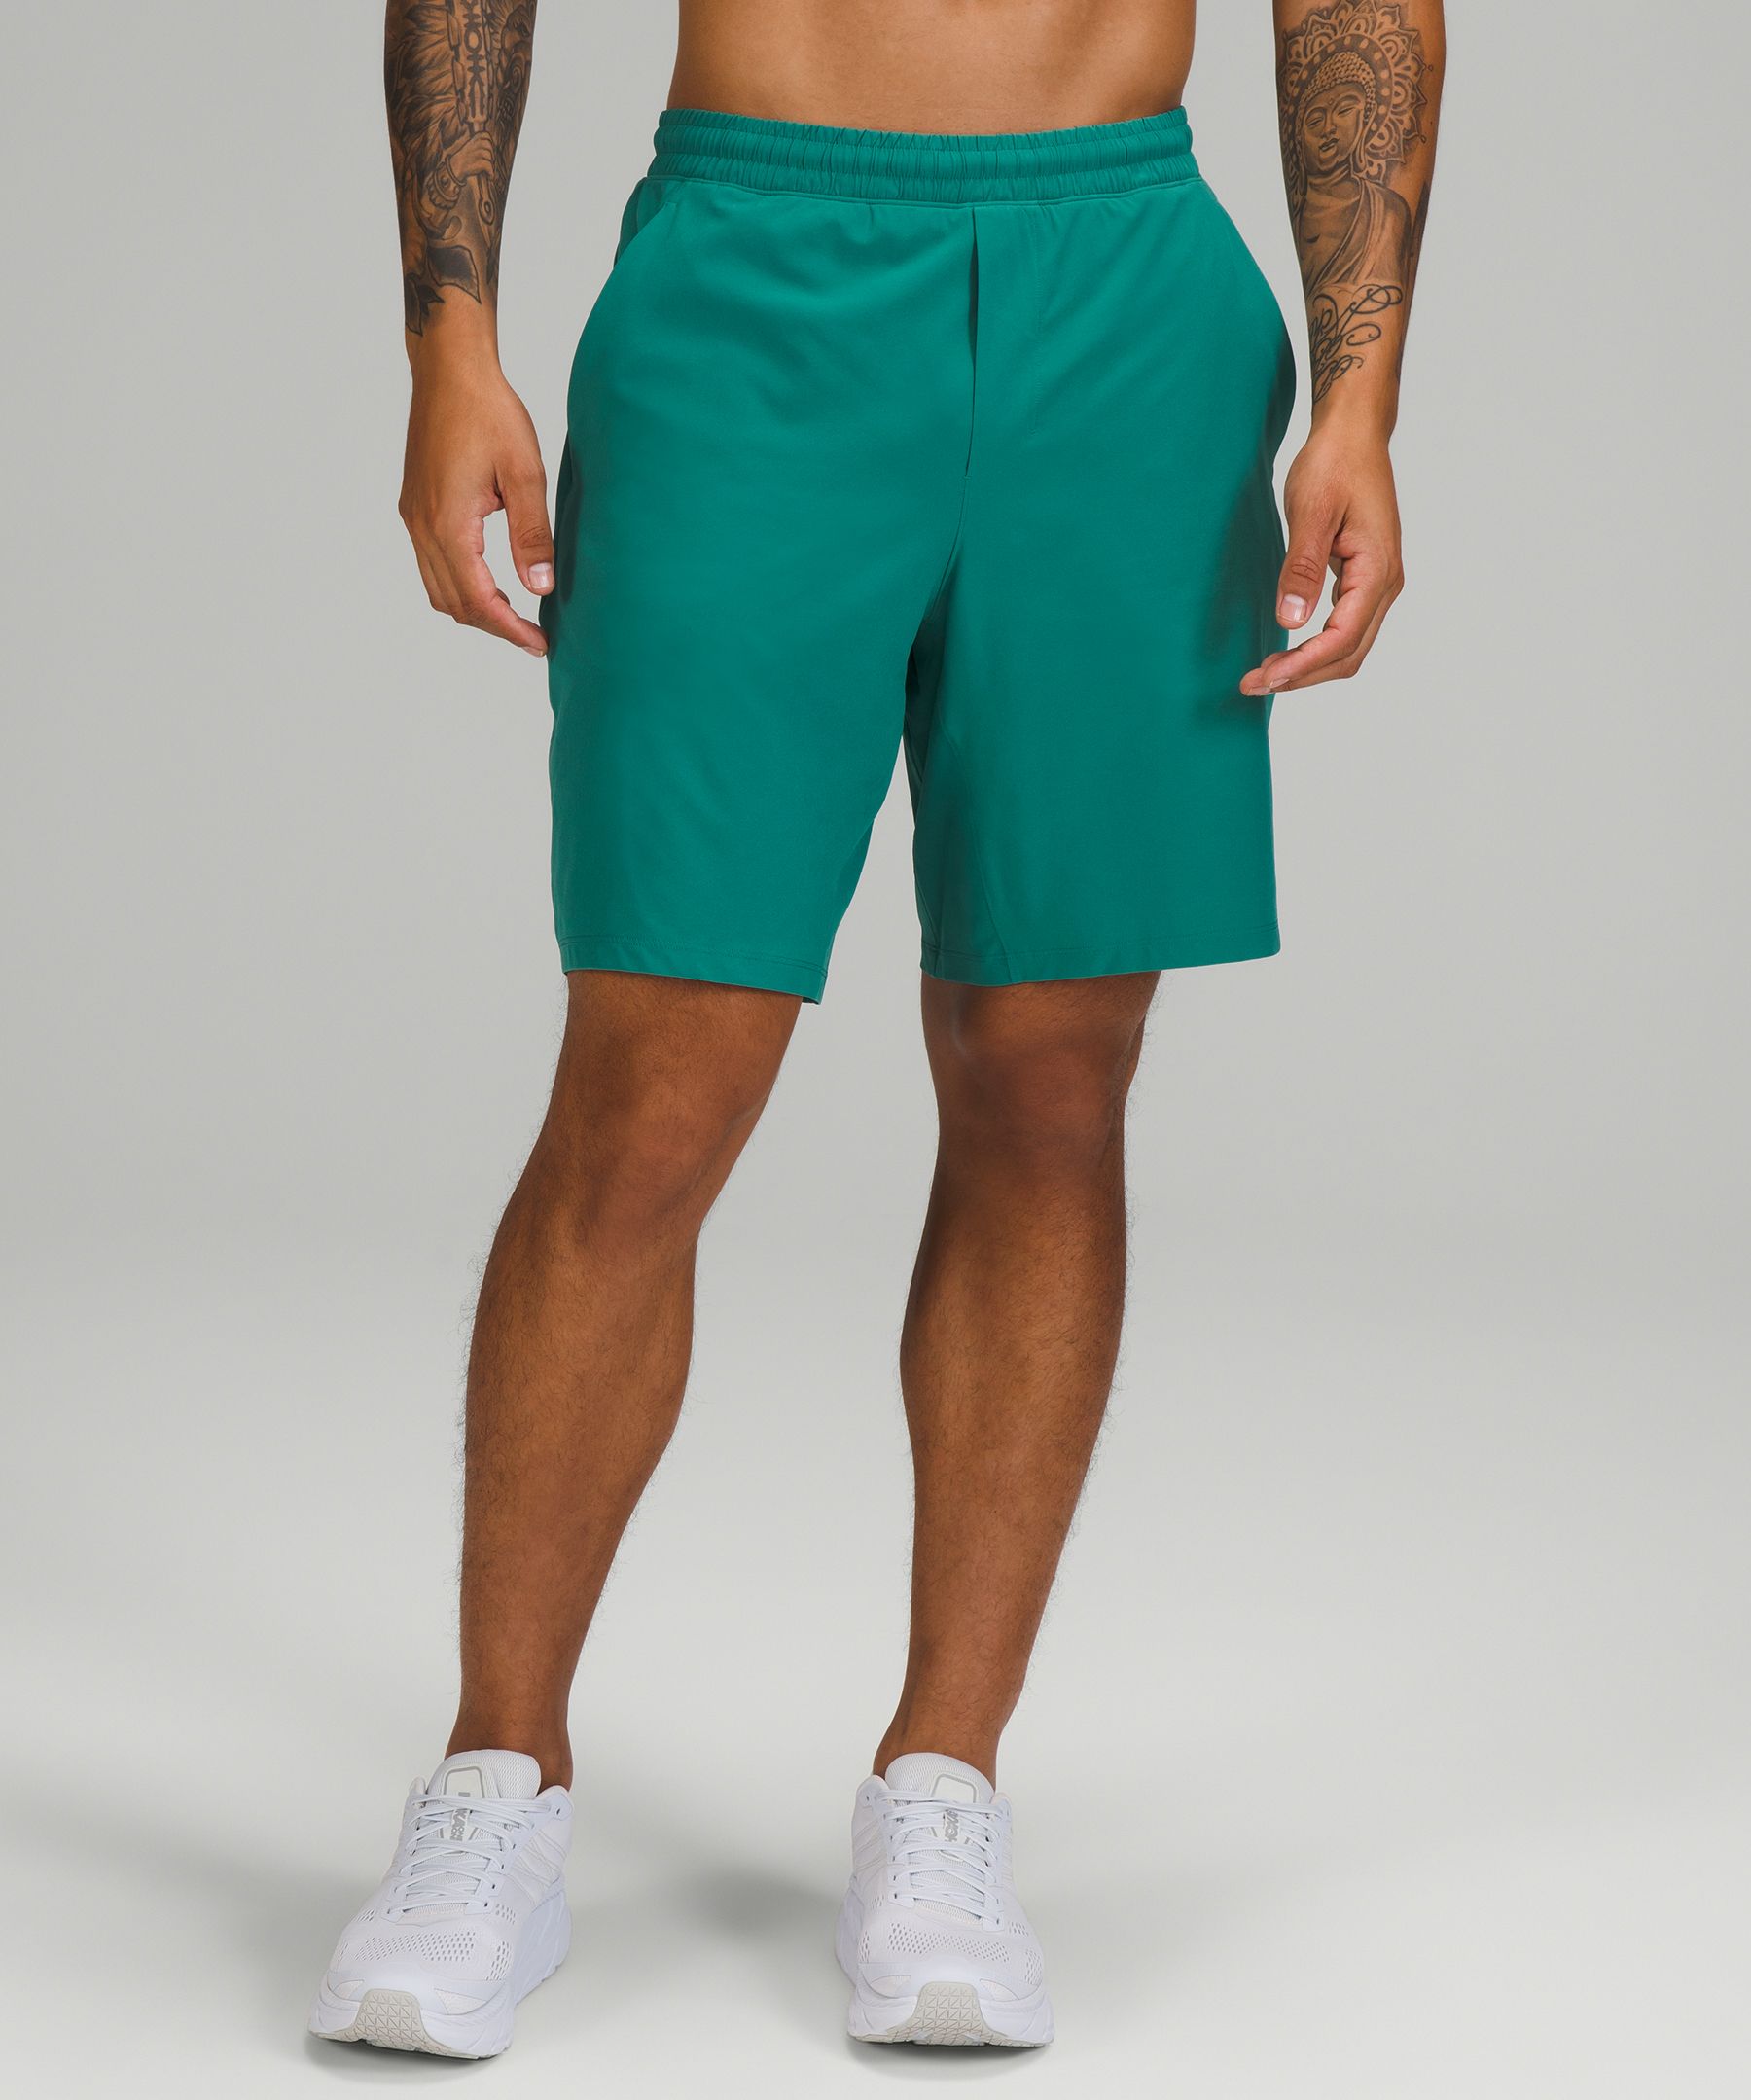 Lululemon Pace Breaker Lined Shorts 9" In Teal Lagoon